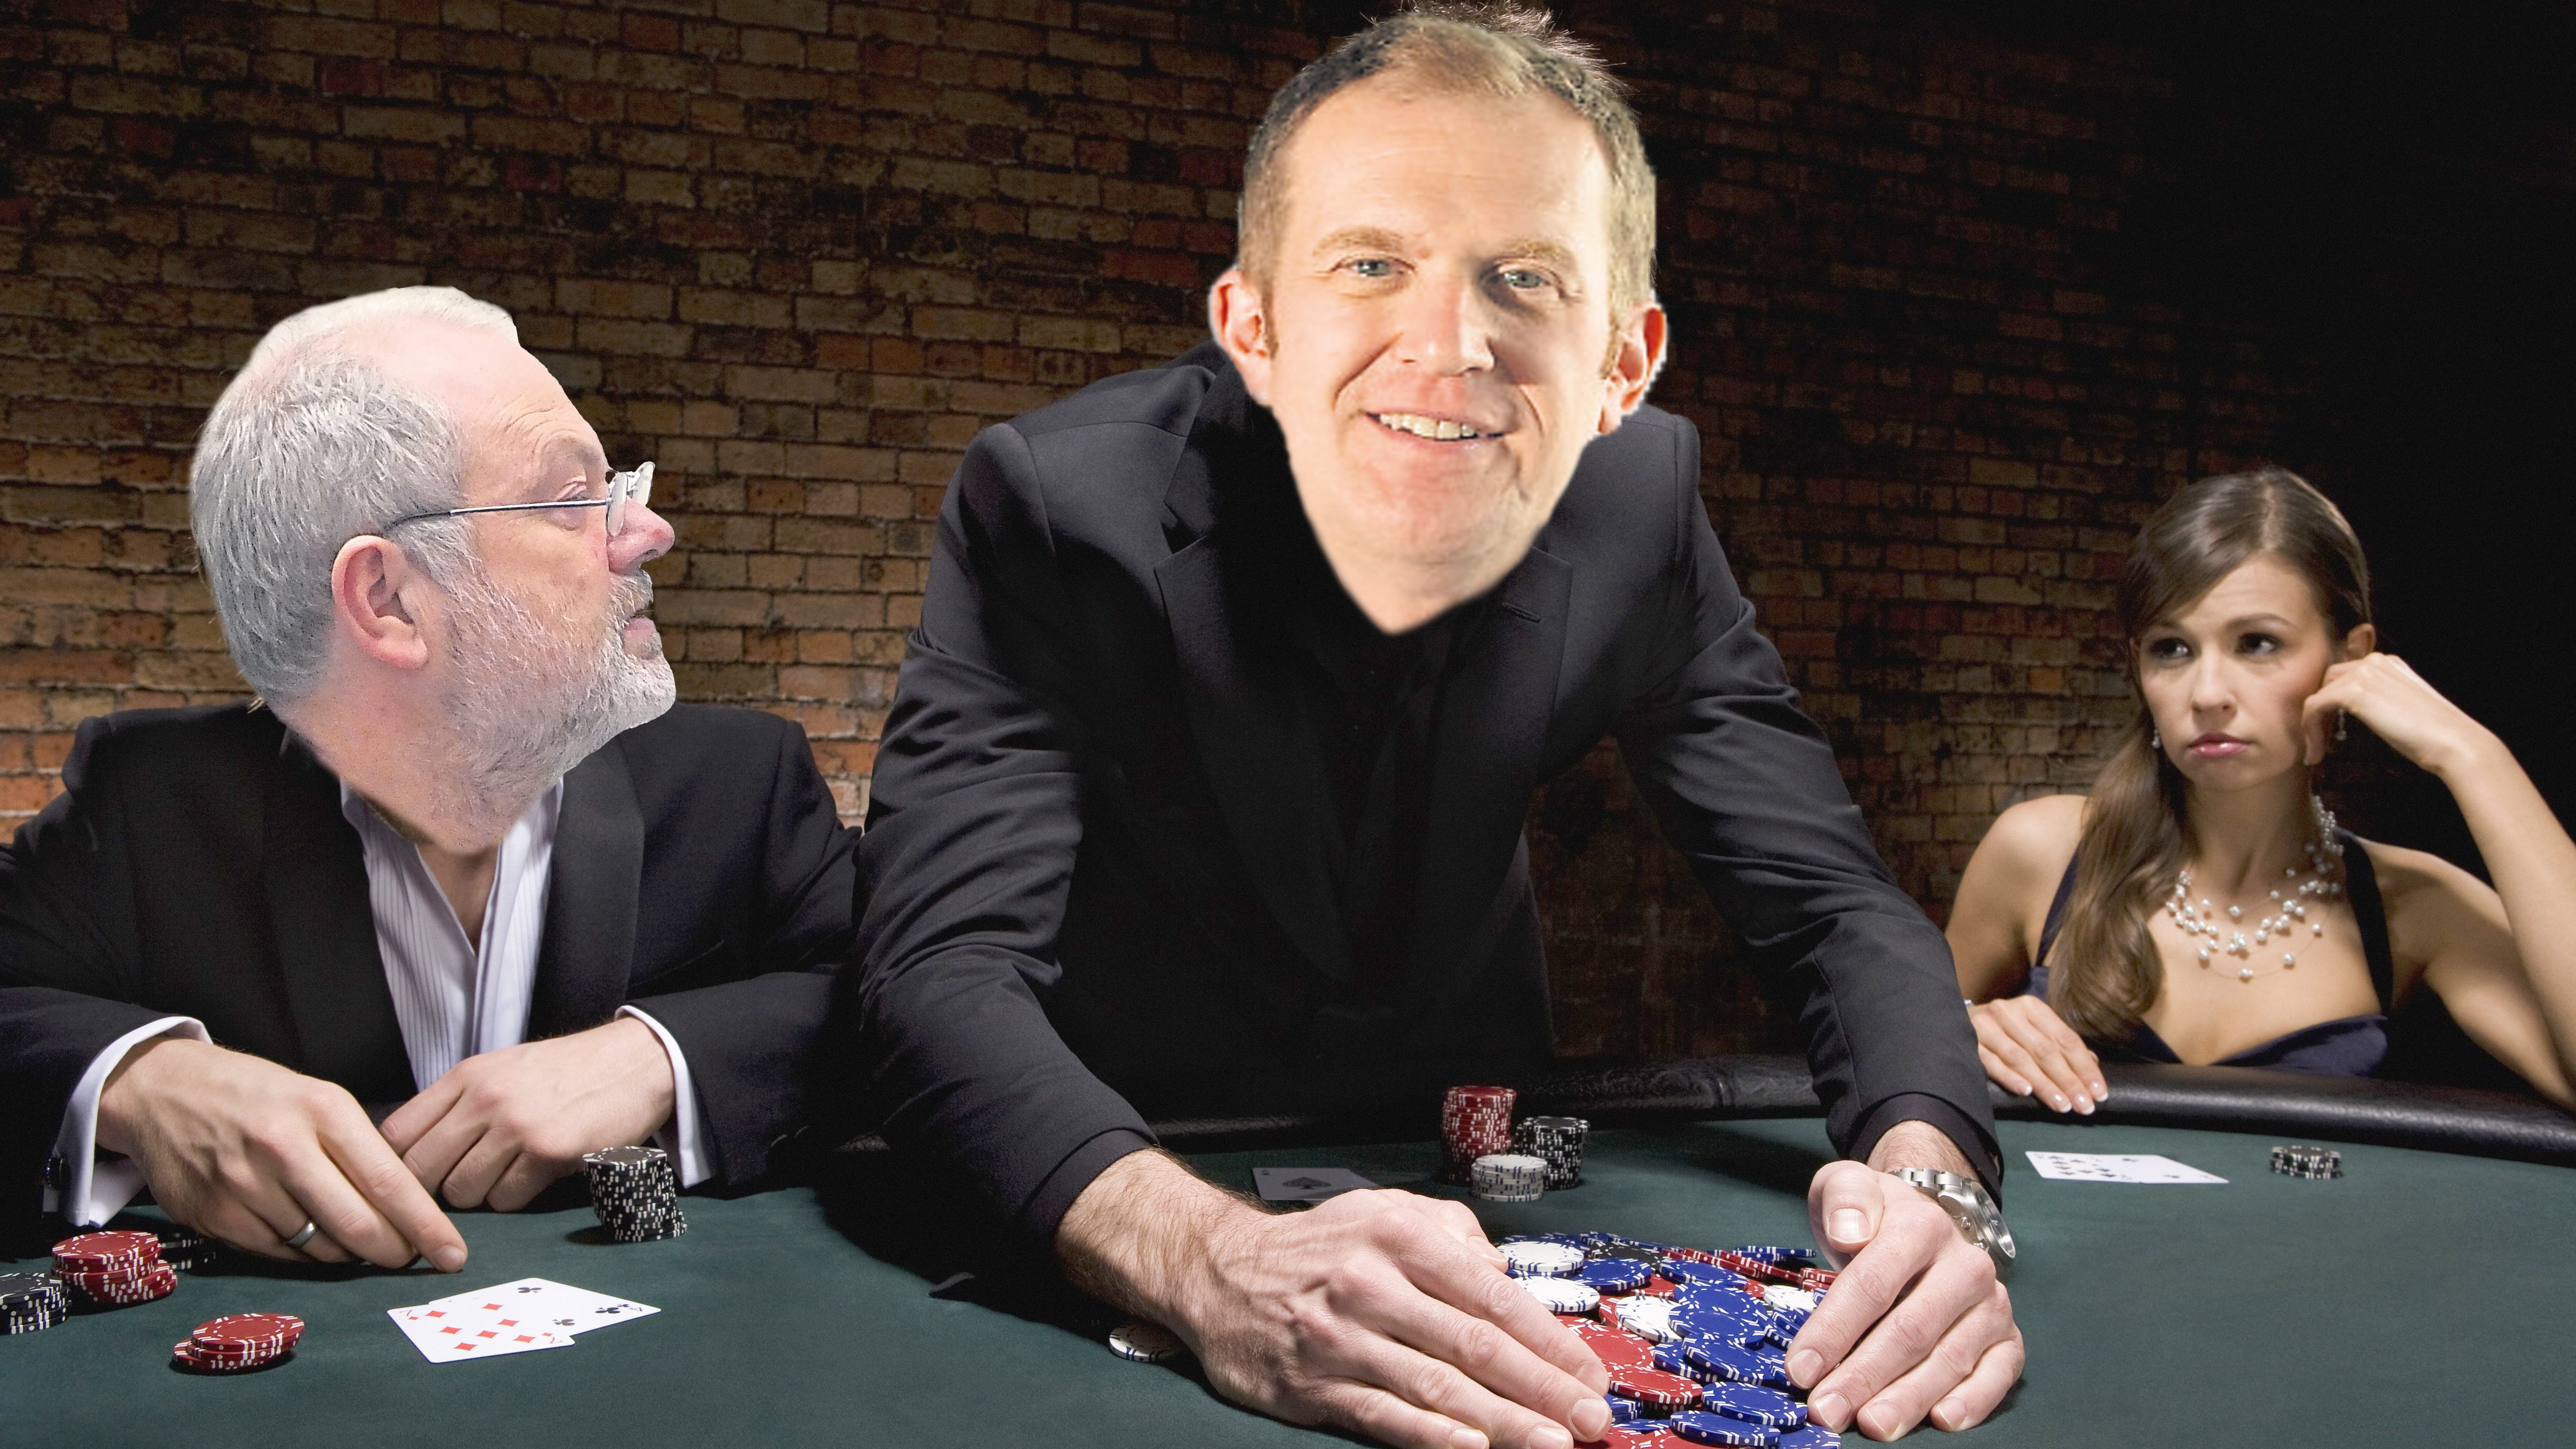 The chips are down for KU staff as the VC has all the cards in his hands. How Steven Spier and Andy Higginbottom might look at the poker tables.